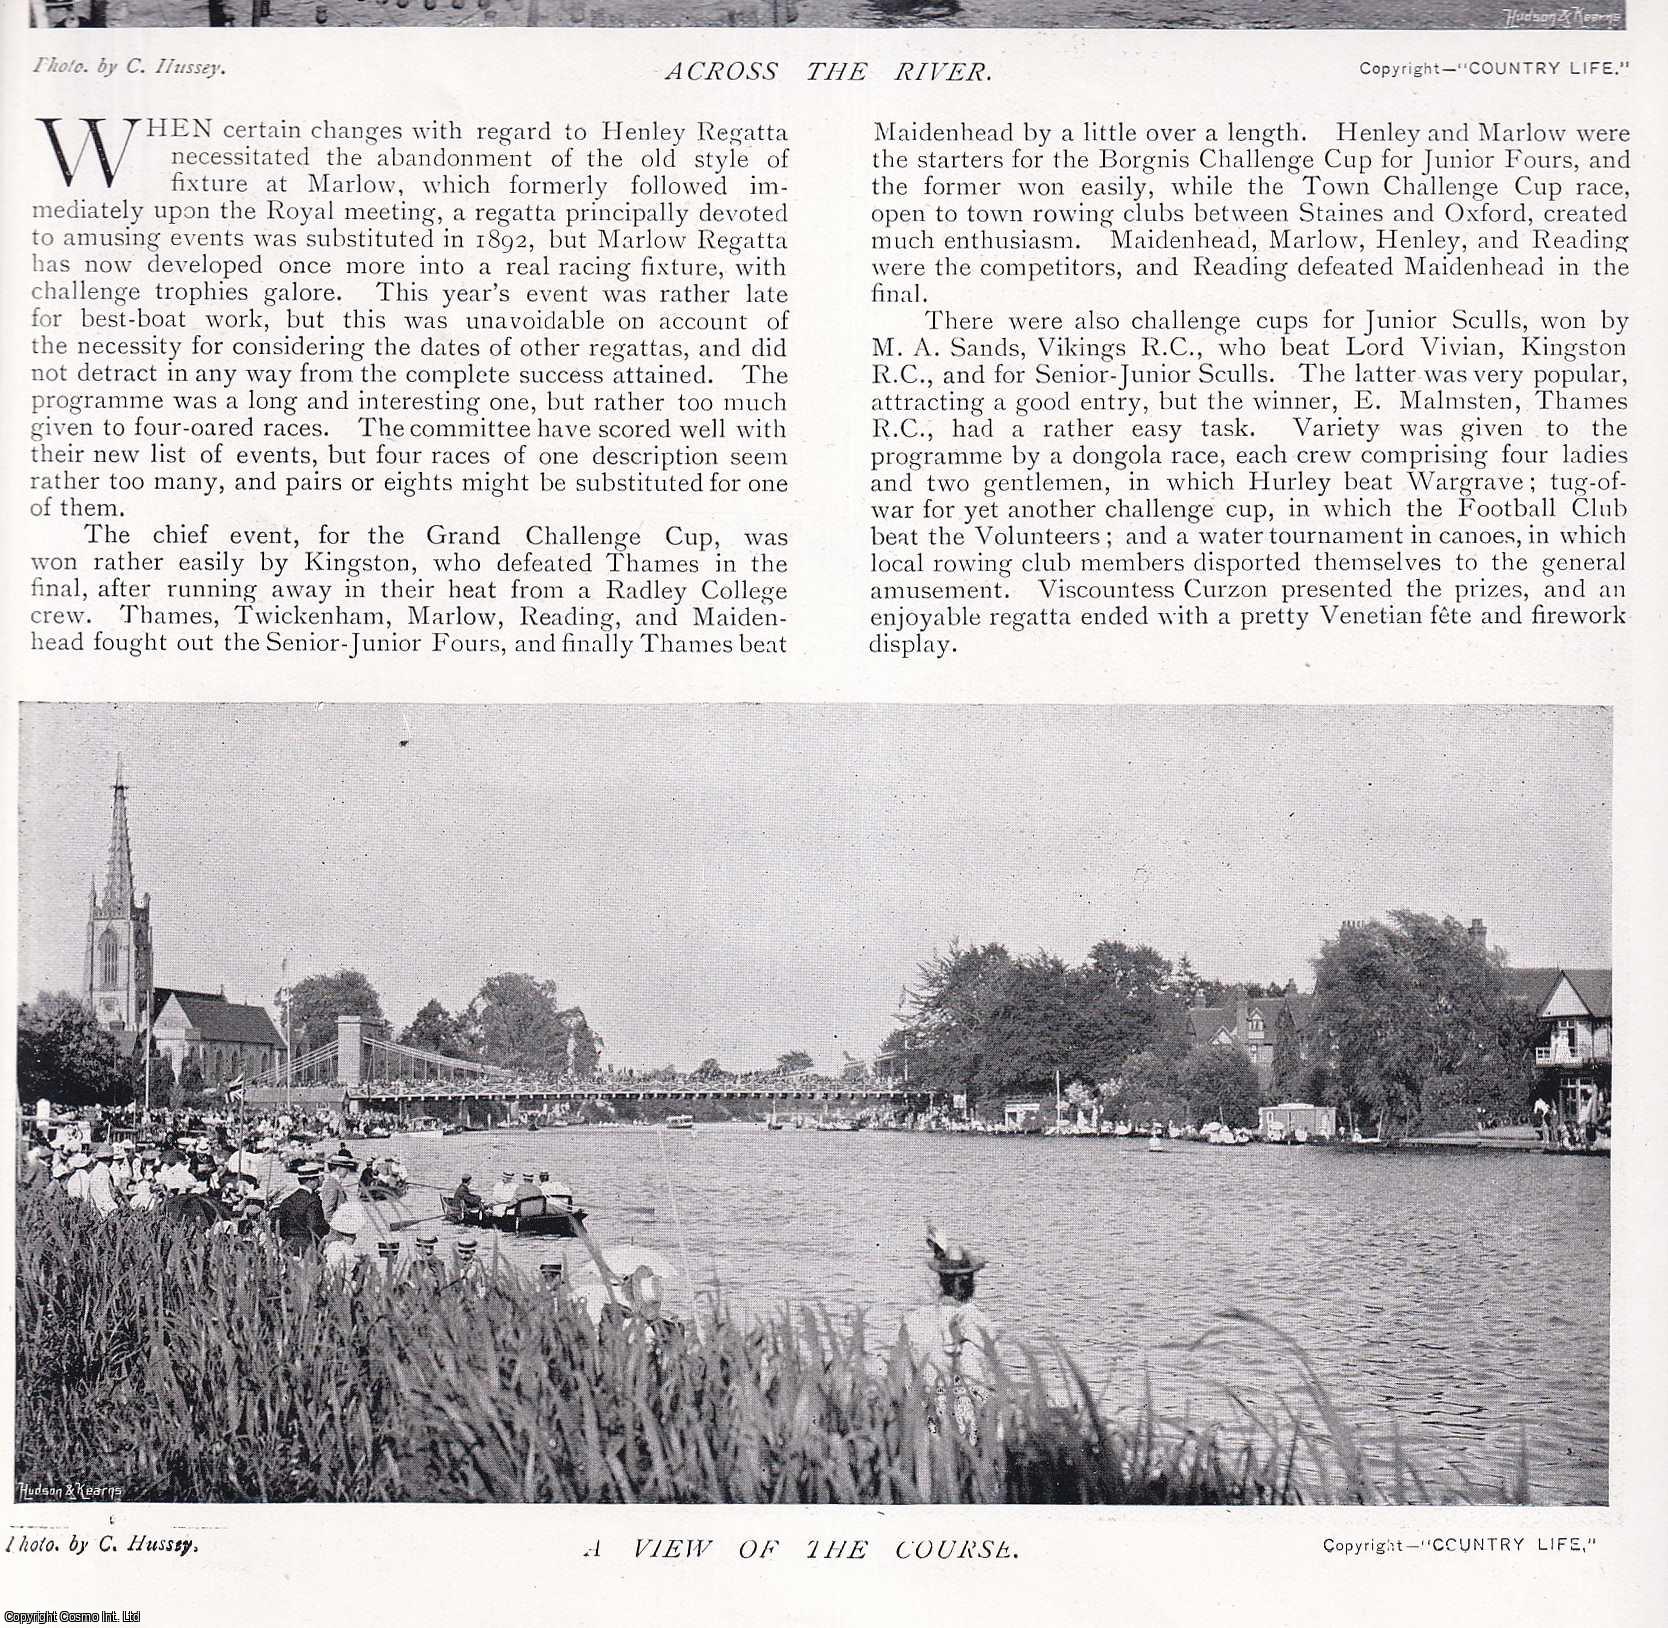 COUNTRY LIFE - Marlow Regatta. Several pictures and accompanying text, removed from an original issue of Country Life Magazine, 1897.